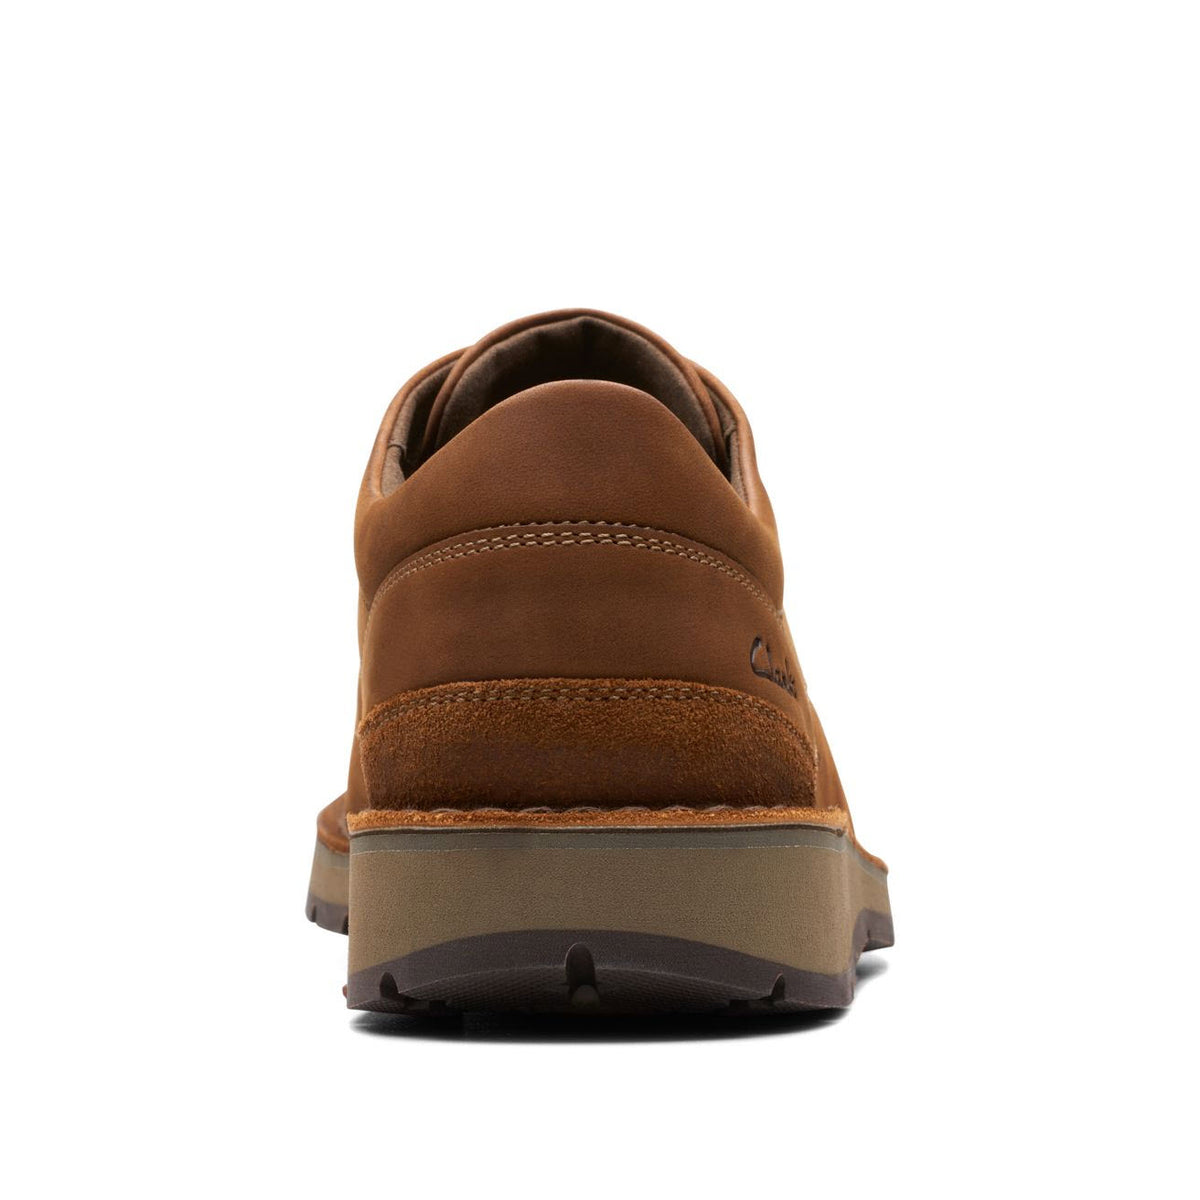 Rear view of a single Clarks Gravelle Low Lace Oxford Dark Brown Nubuck hiking shoe featuring Active Air technology and visible branding on the heel, set against a white background.